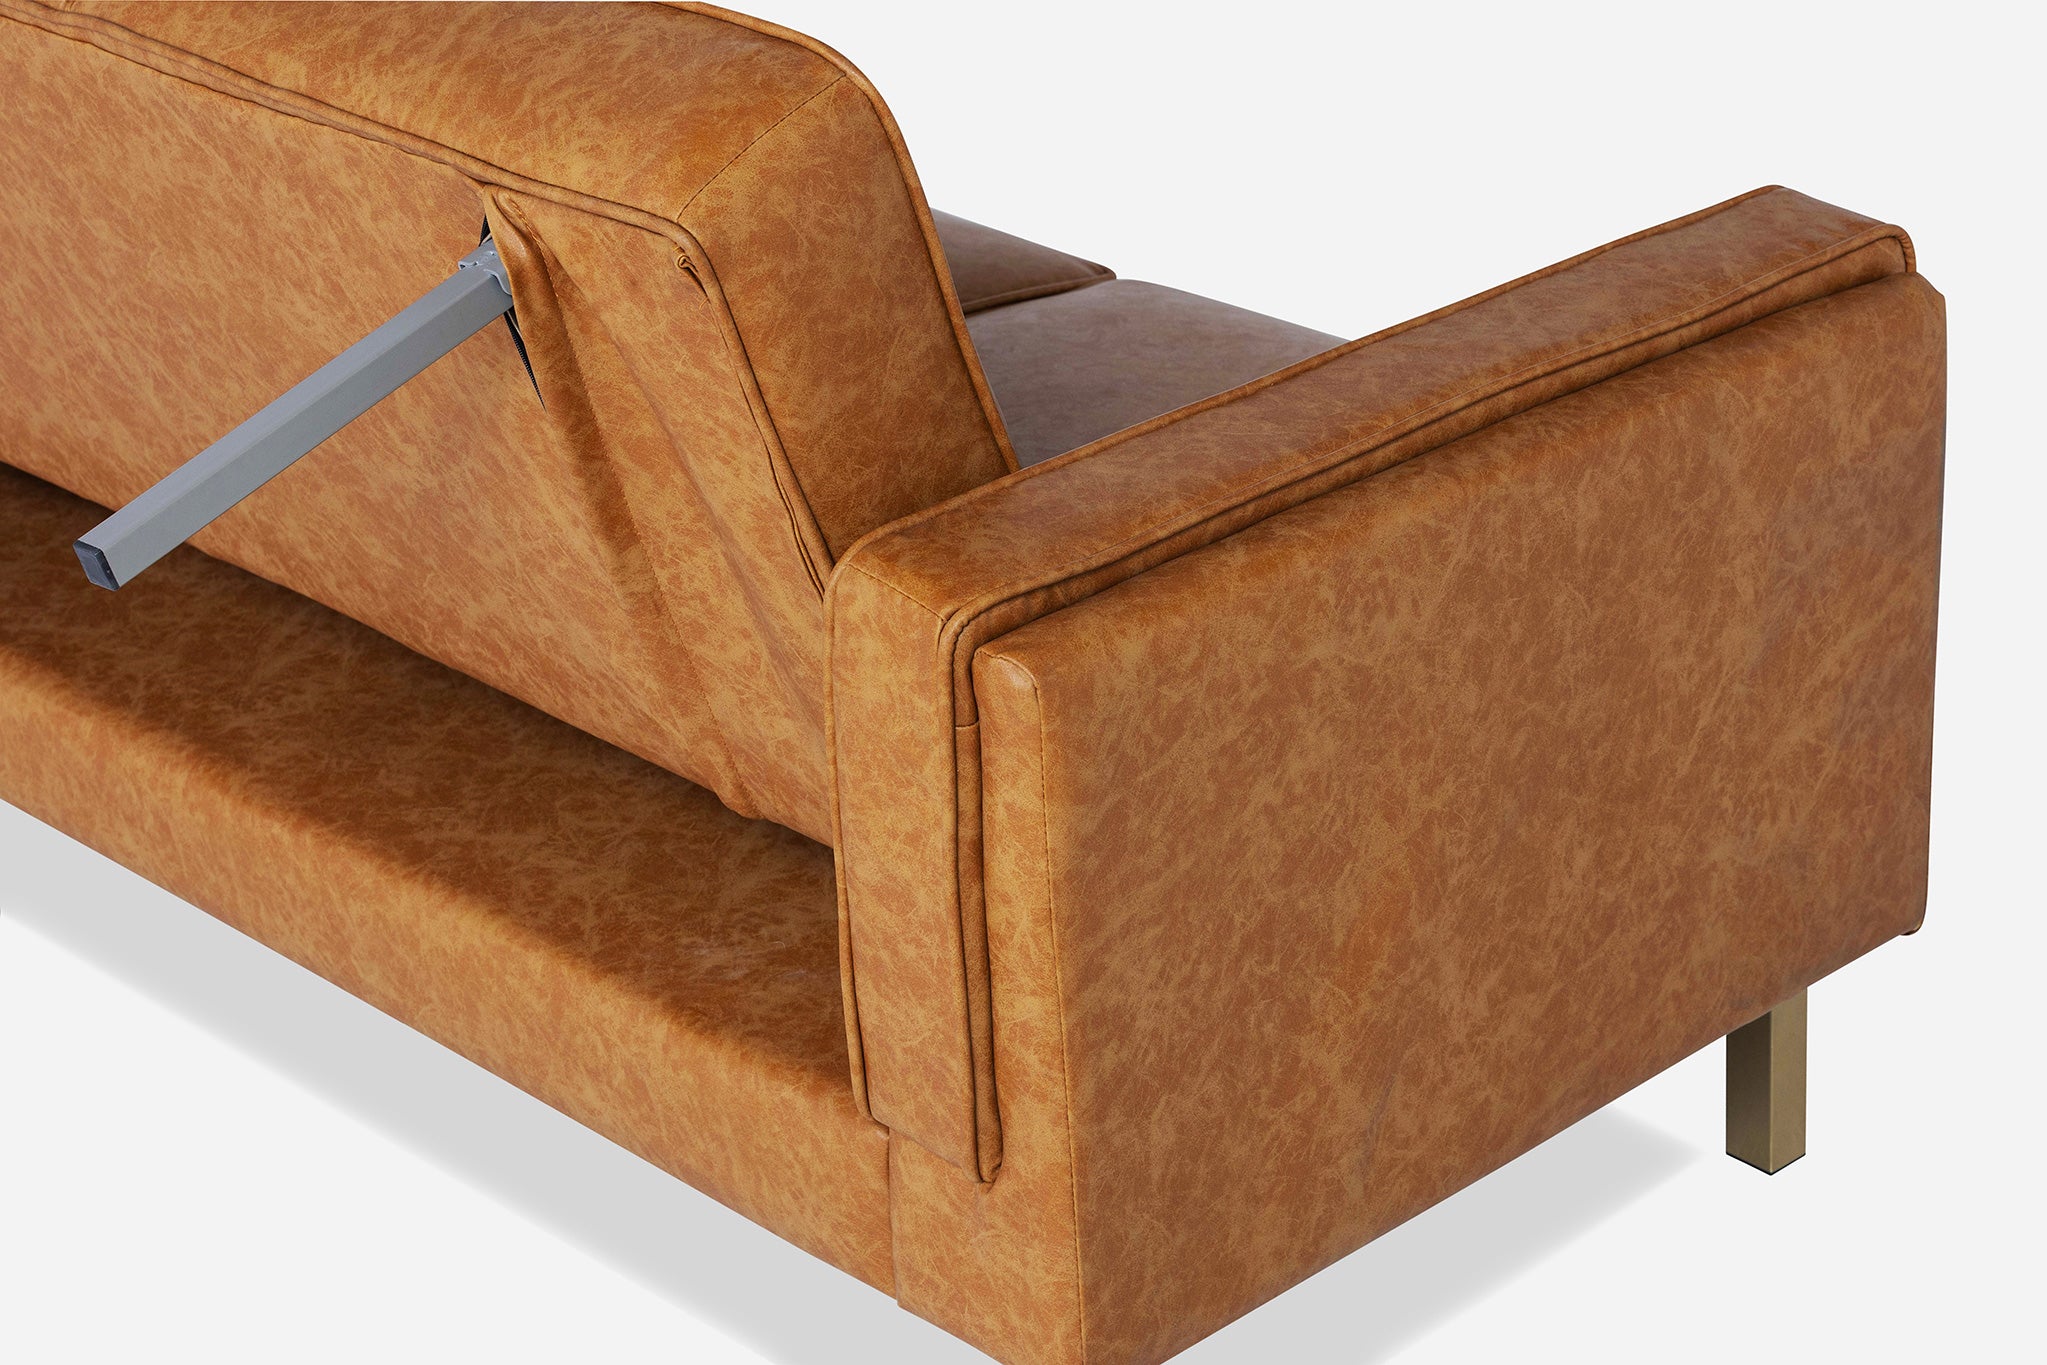 detail of the albany sleeper sofa's armrest and leg